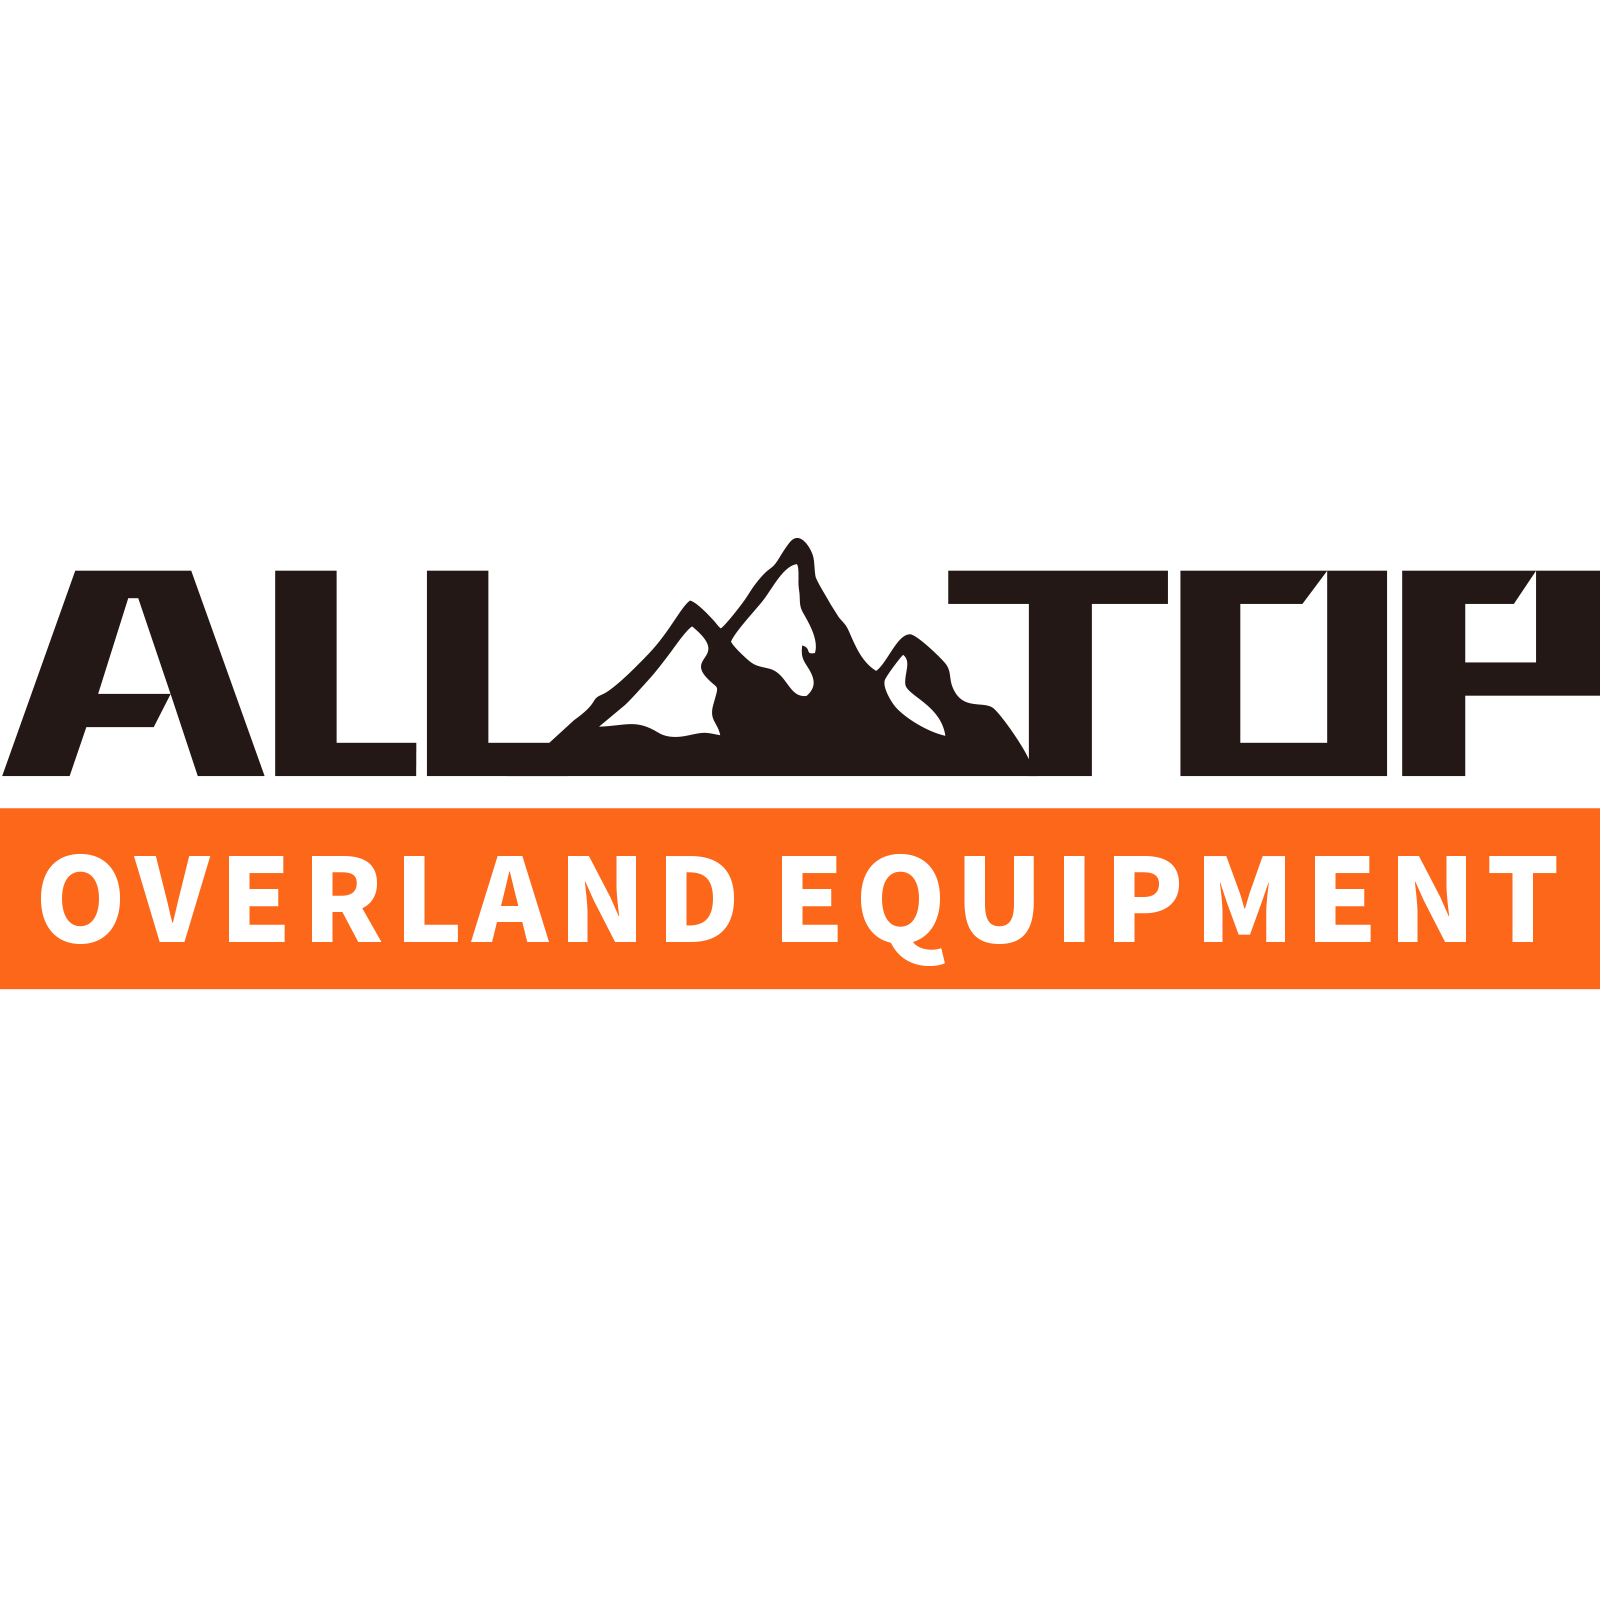 All top overland